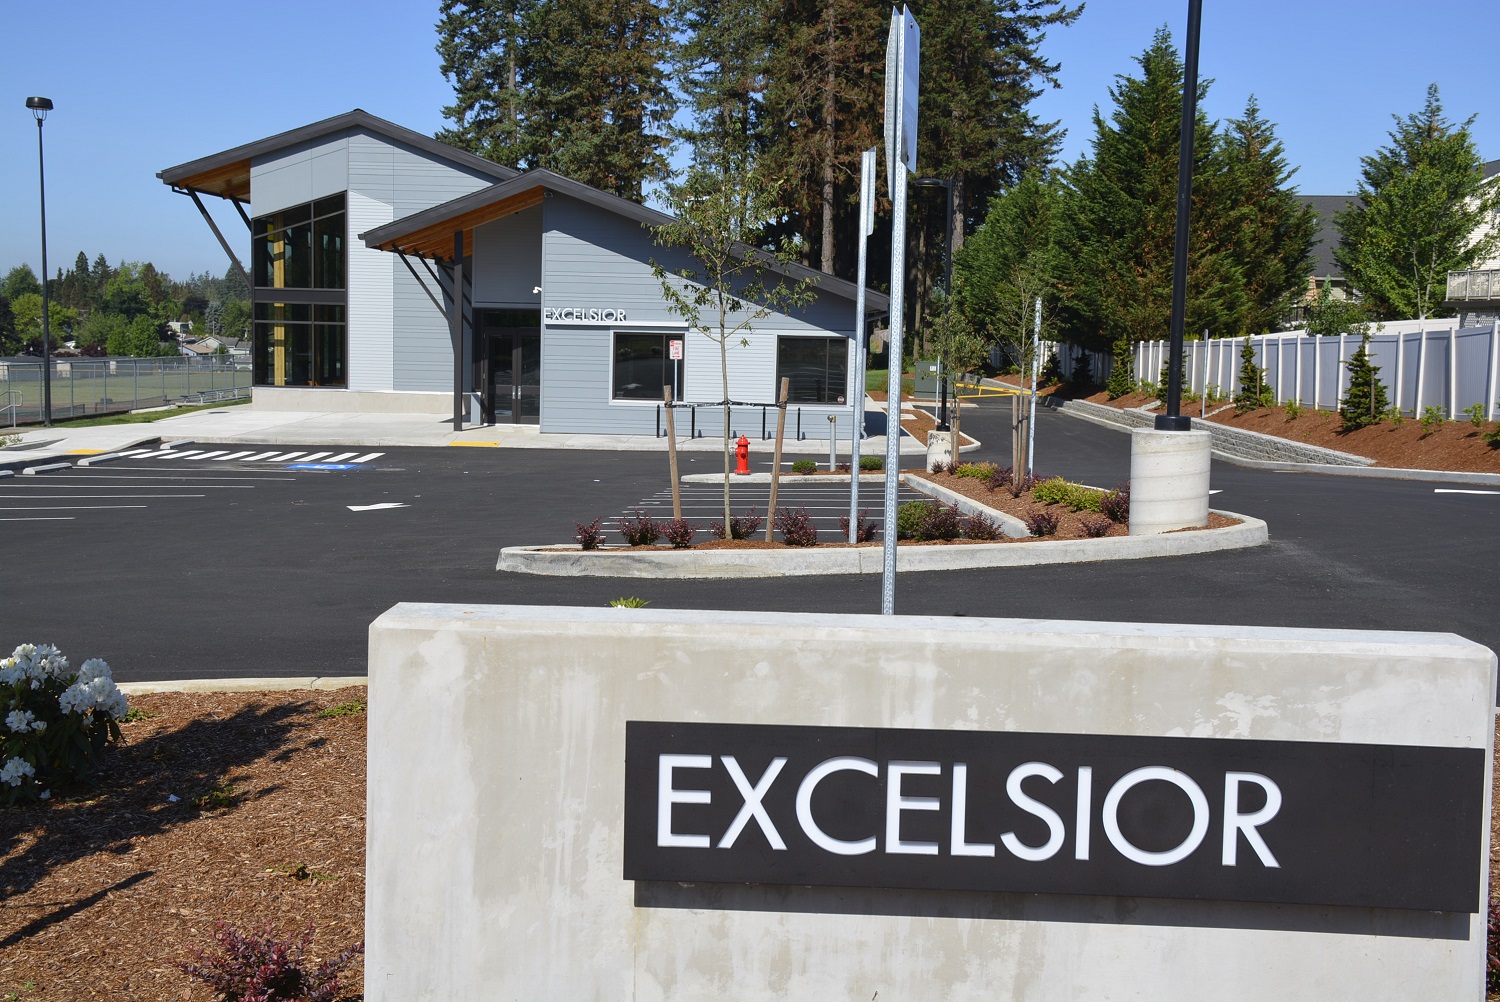 Washougal's new building provides space for personalized education